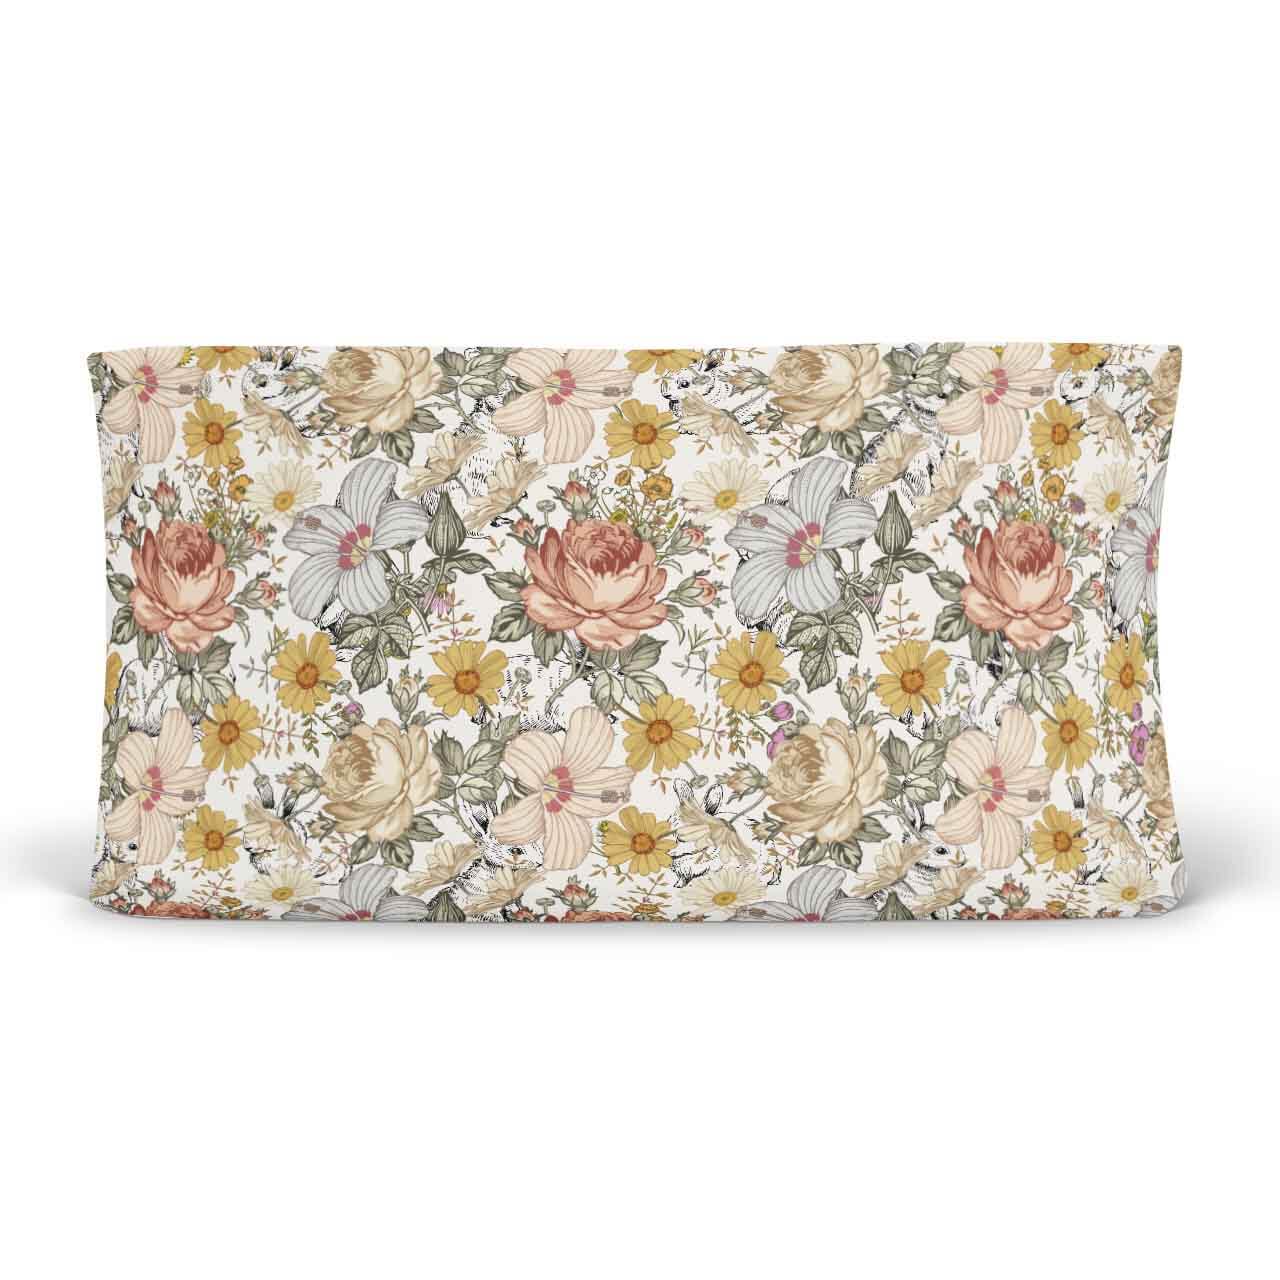 Image of Peyton's Vintage Floral Changing Pad Cover